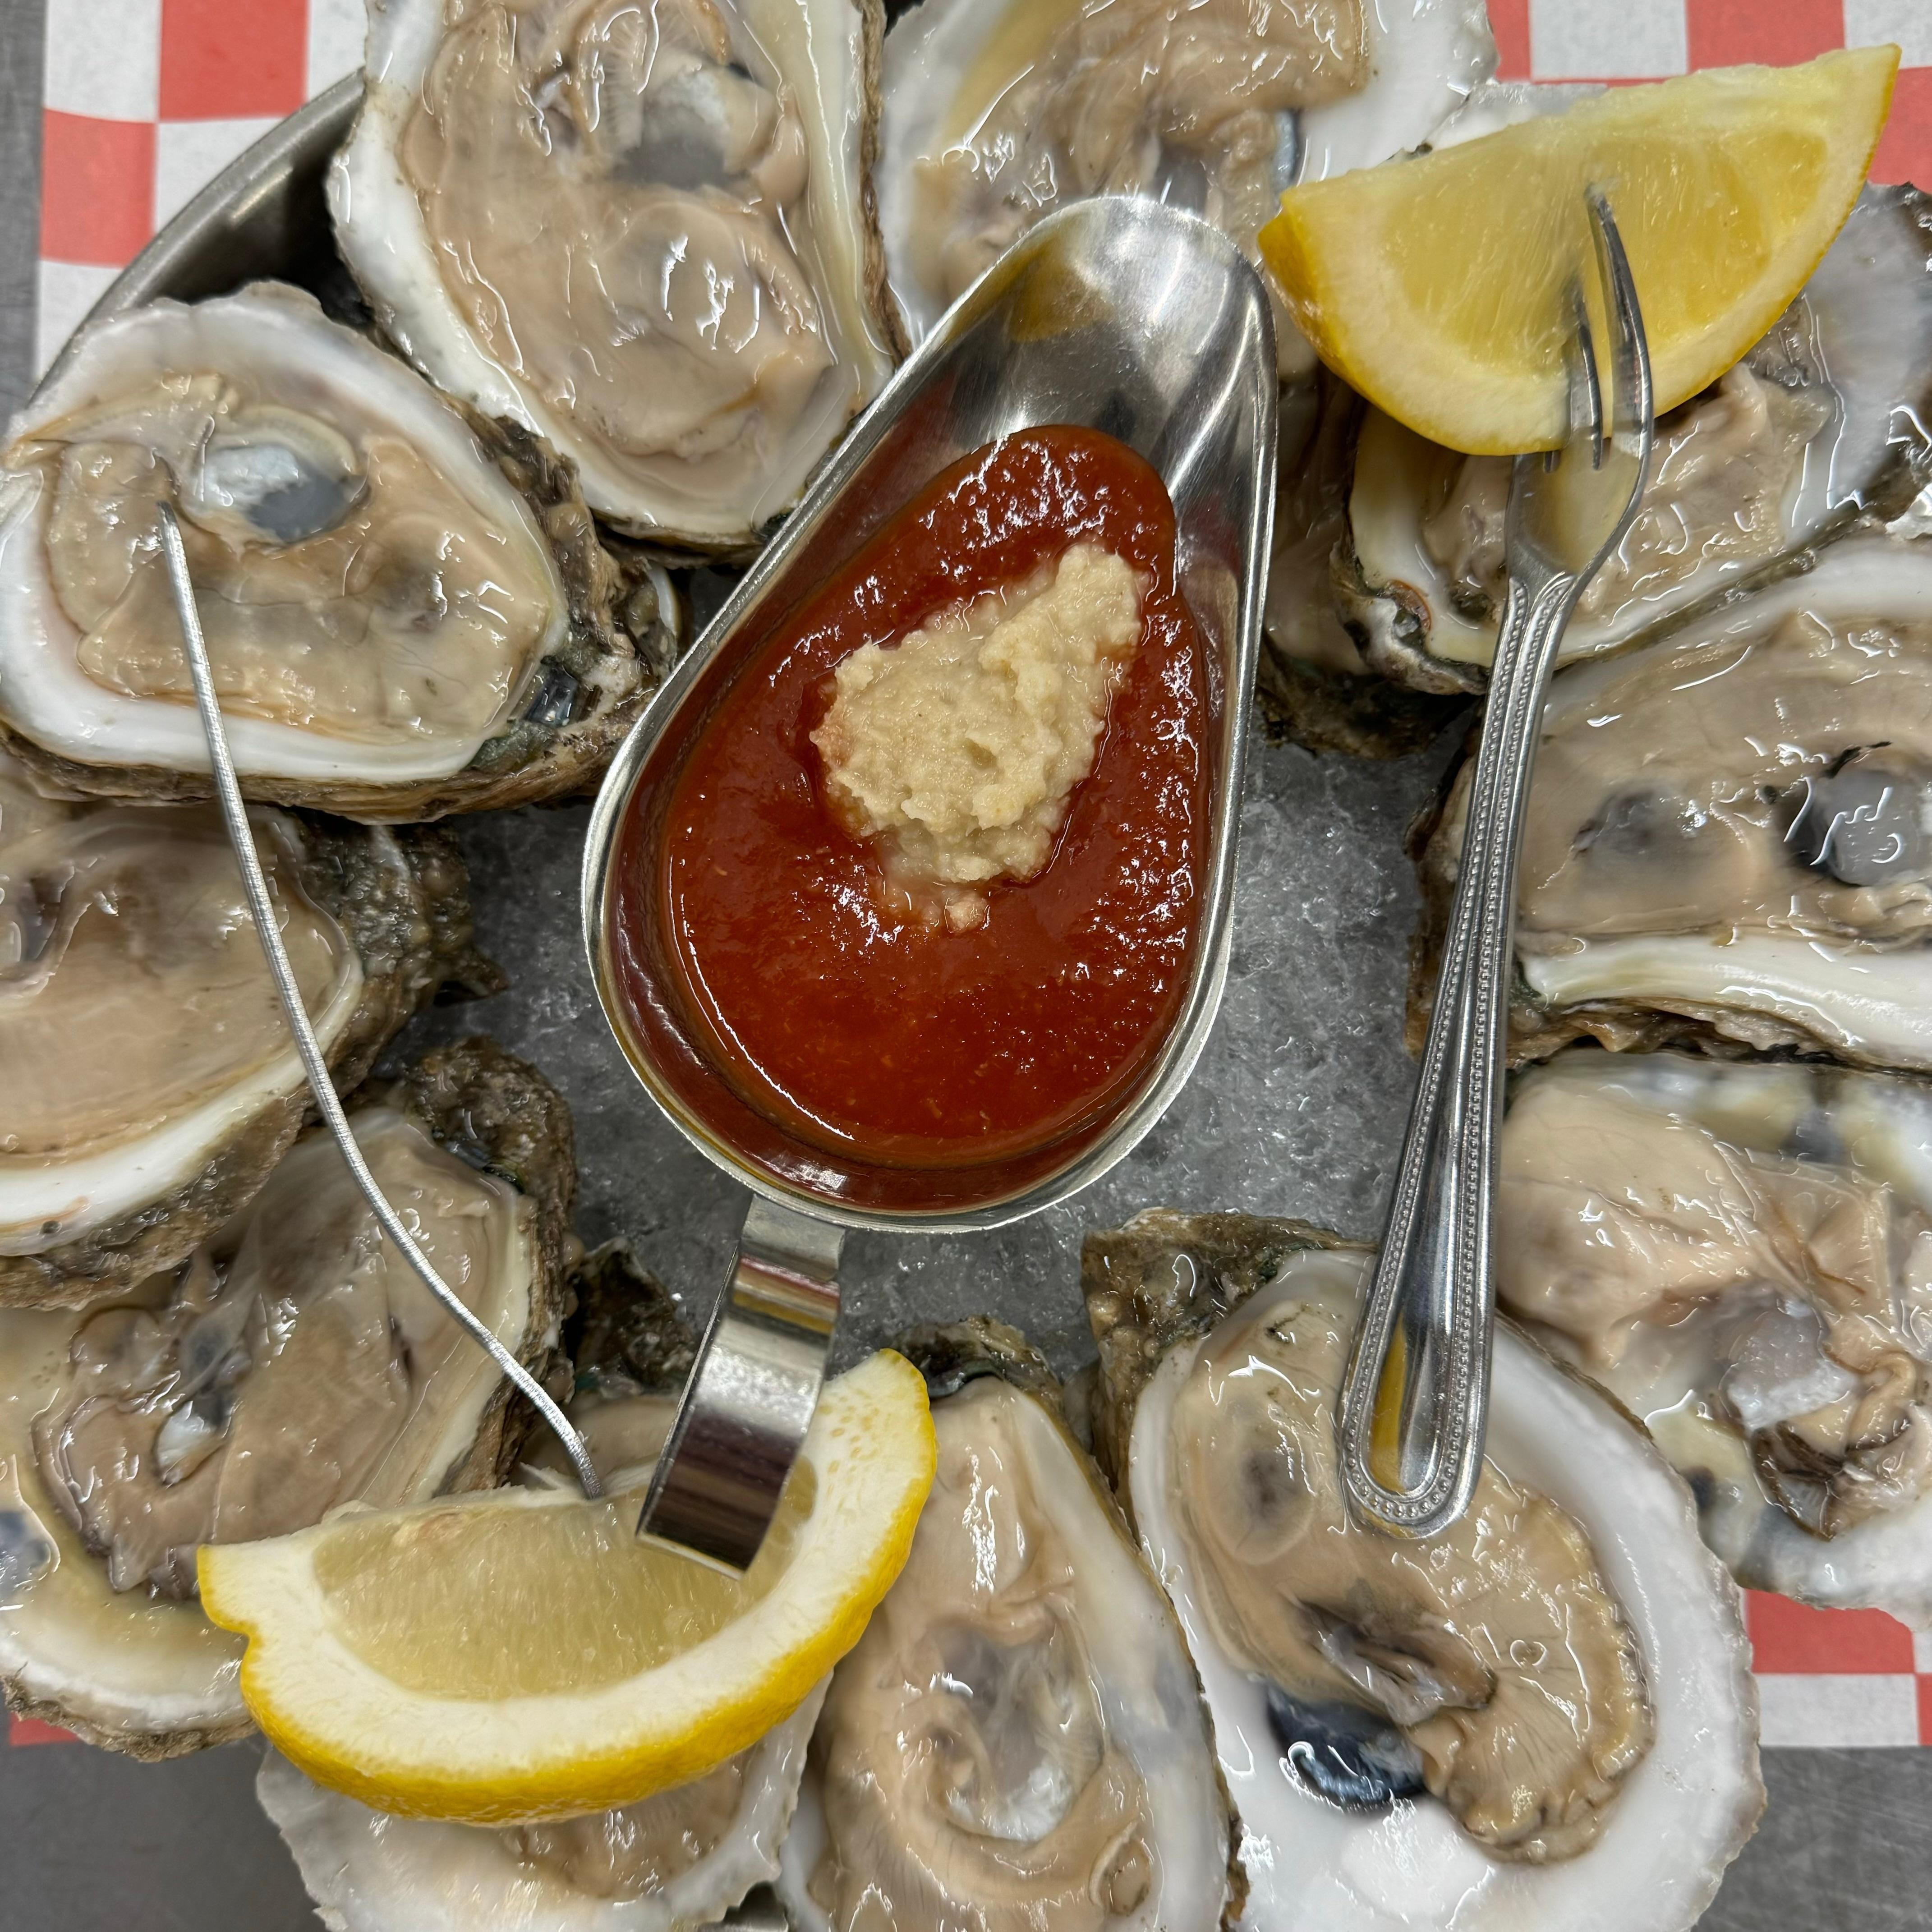 (12) Oysters On The Half Shell